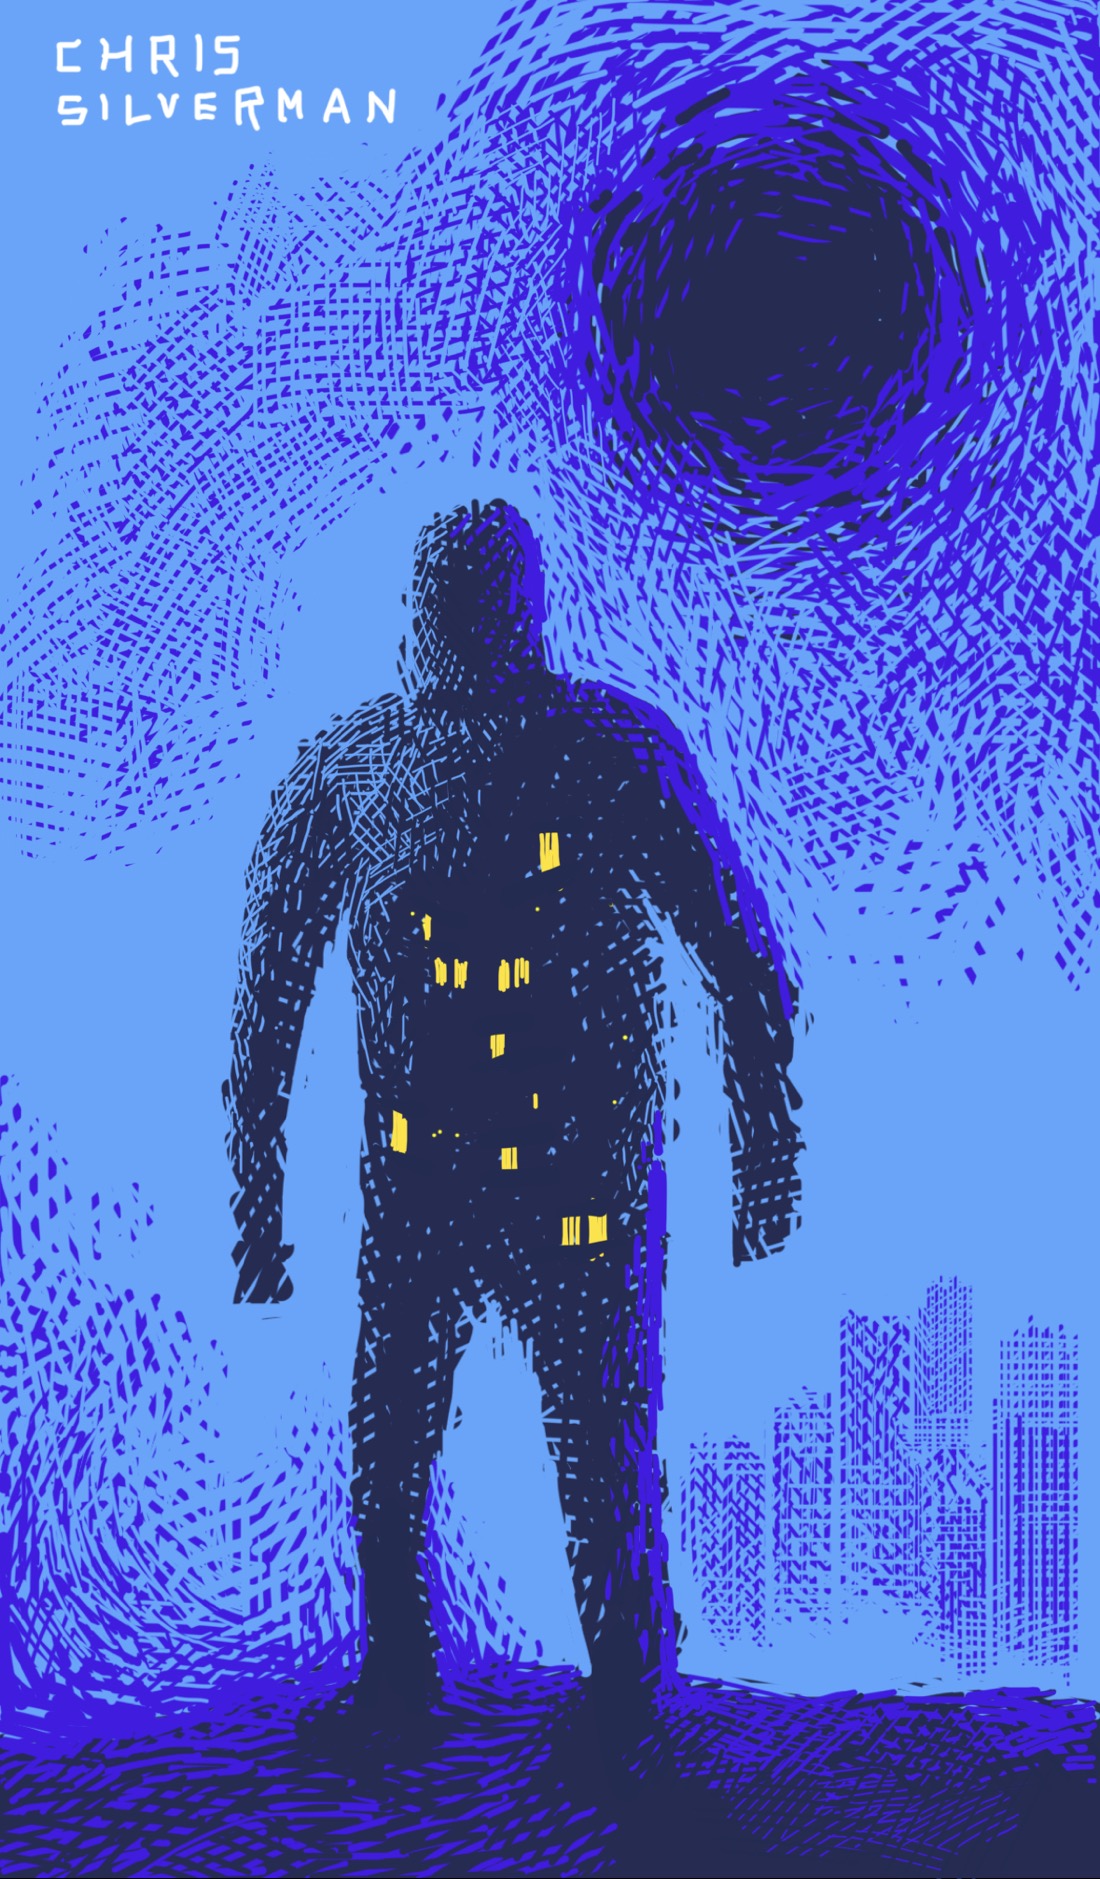 A figure stands silhouetted against the sky. In the background is a city skyline of skyscrapers. In the sky, where the sun would be, is a giant black ball, sort of an inverted sun that resembles a black hole or a vortex. The figure, mostly black, has small yellow rectangles on it, suggesting the windows of a skyscraper. Other than those specks of yellow, the drawing is black and indigo ink on a light blue background.